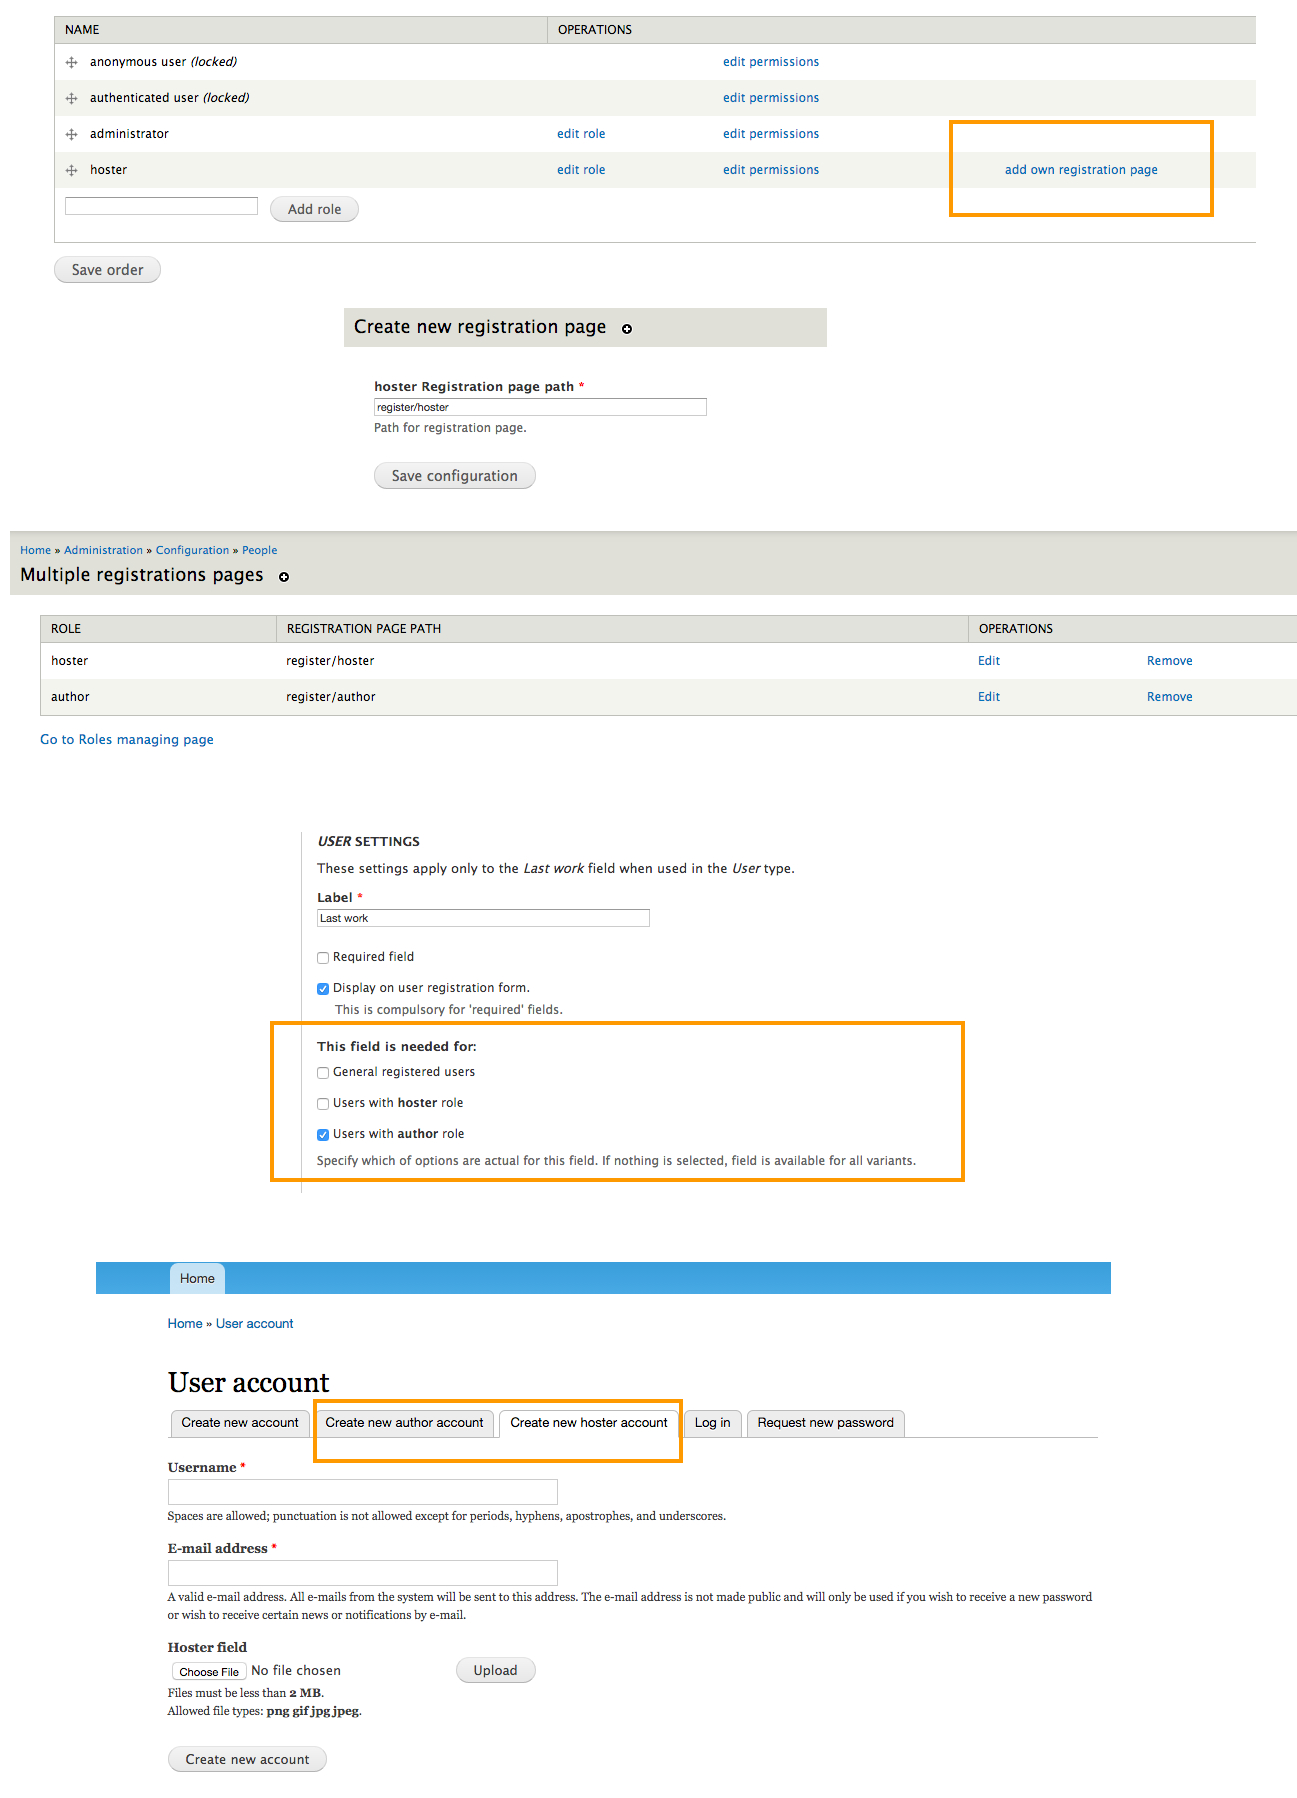 How to Build Role-Specific User Registration Forms: the Multiple Registration Module